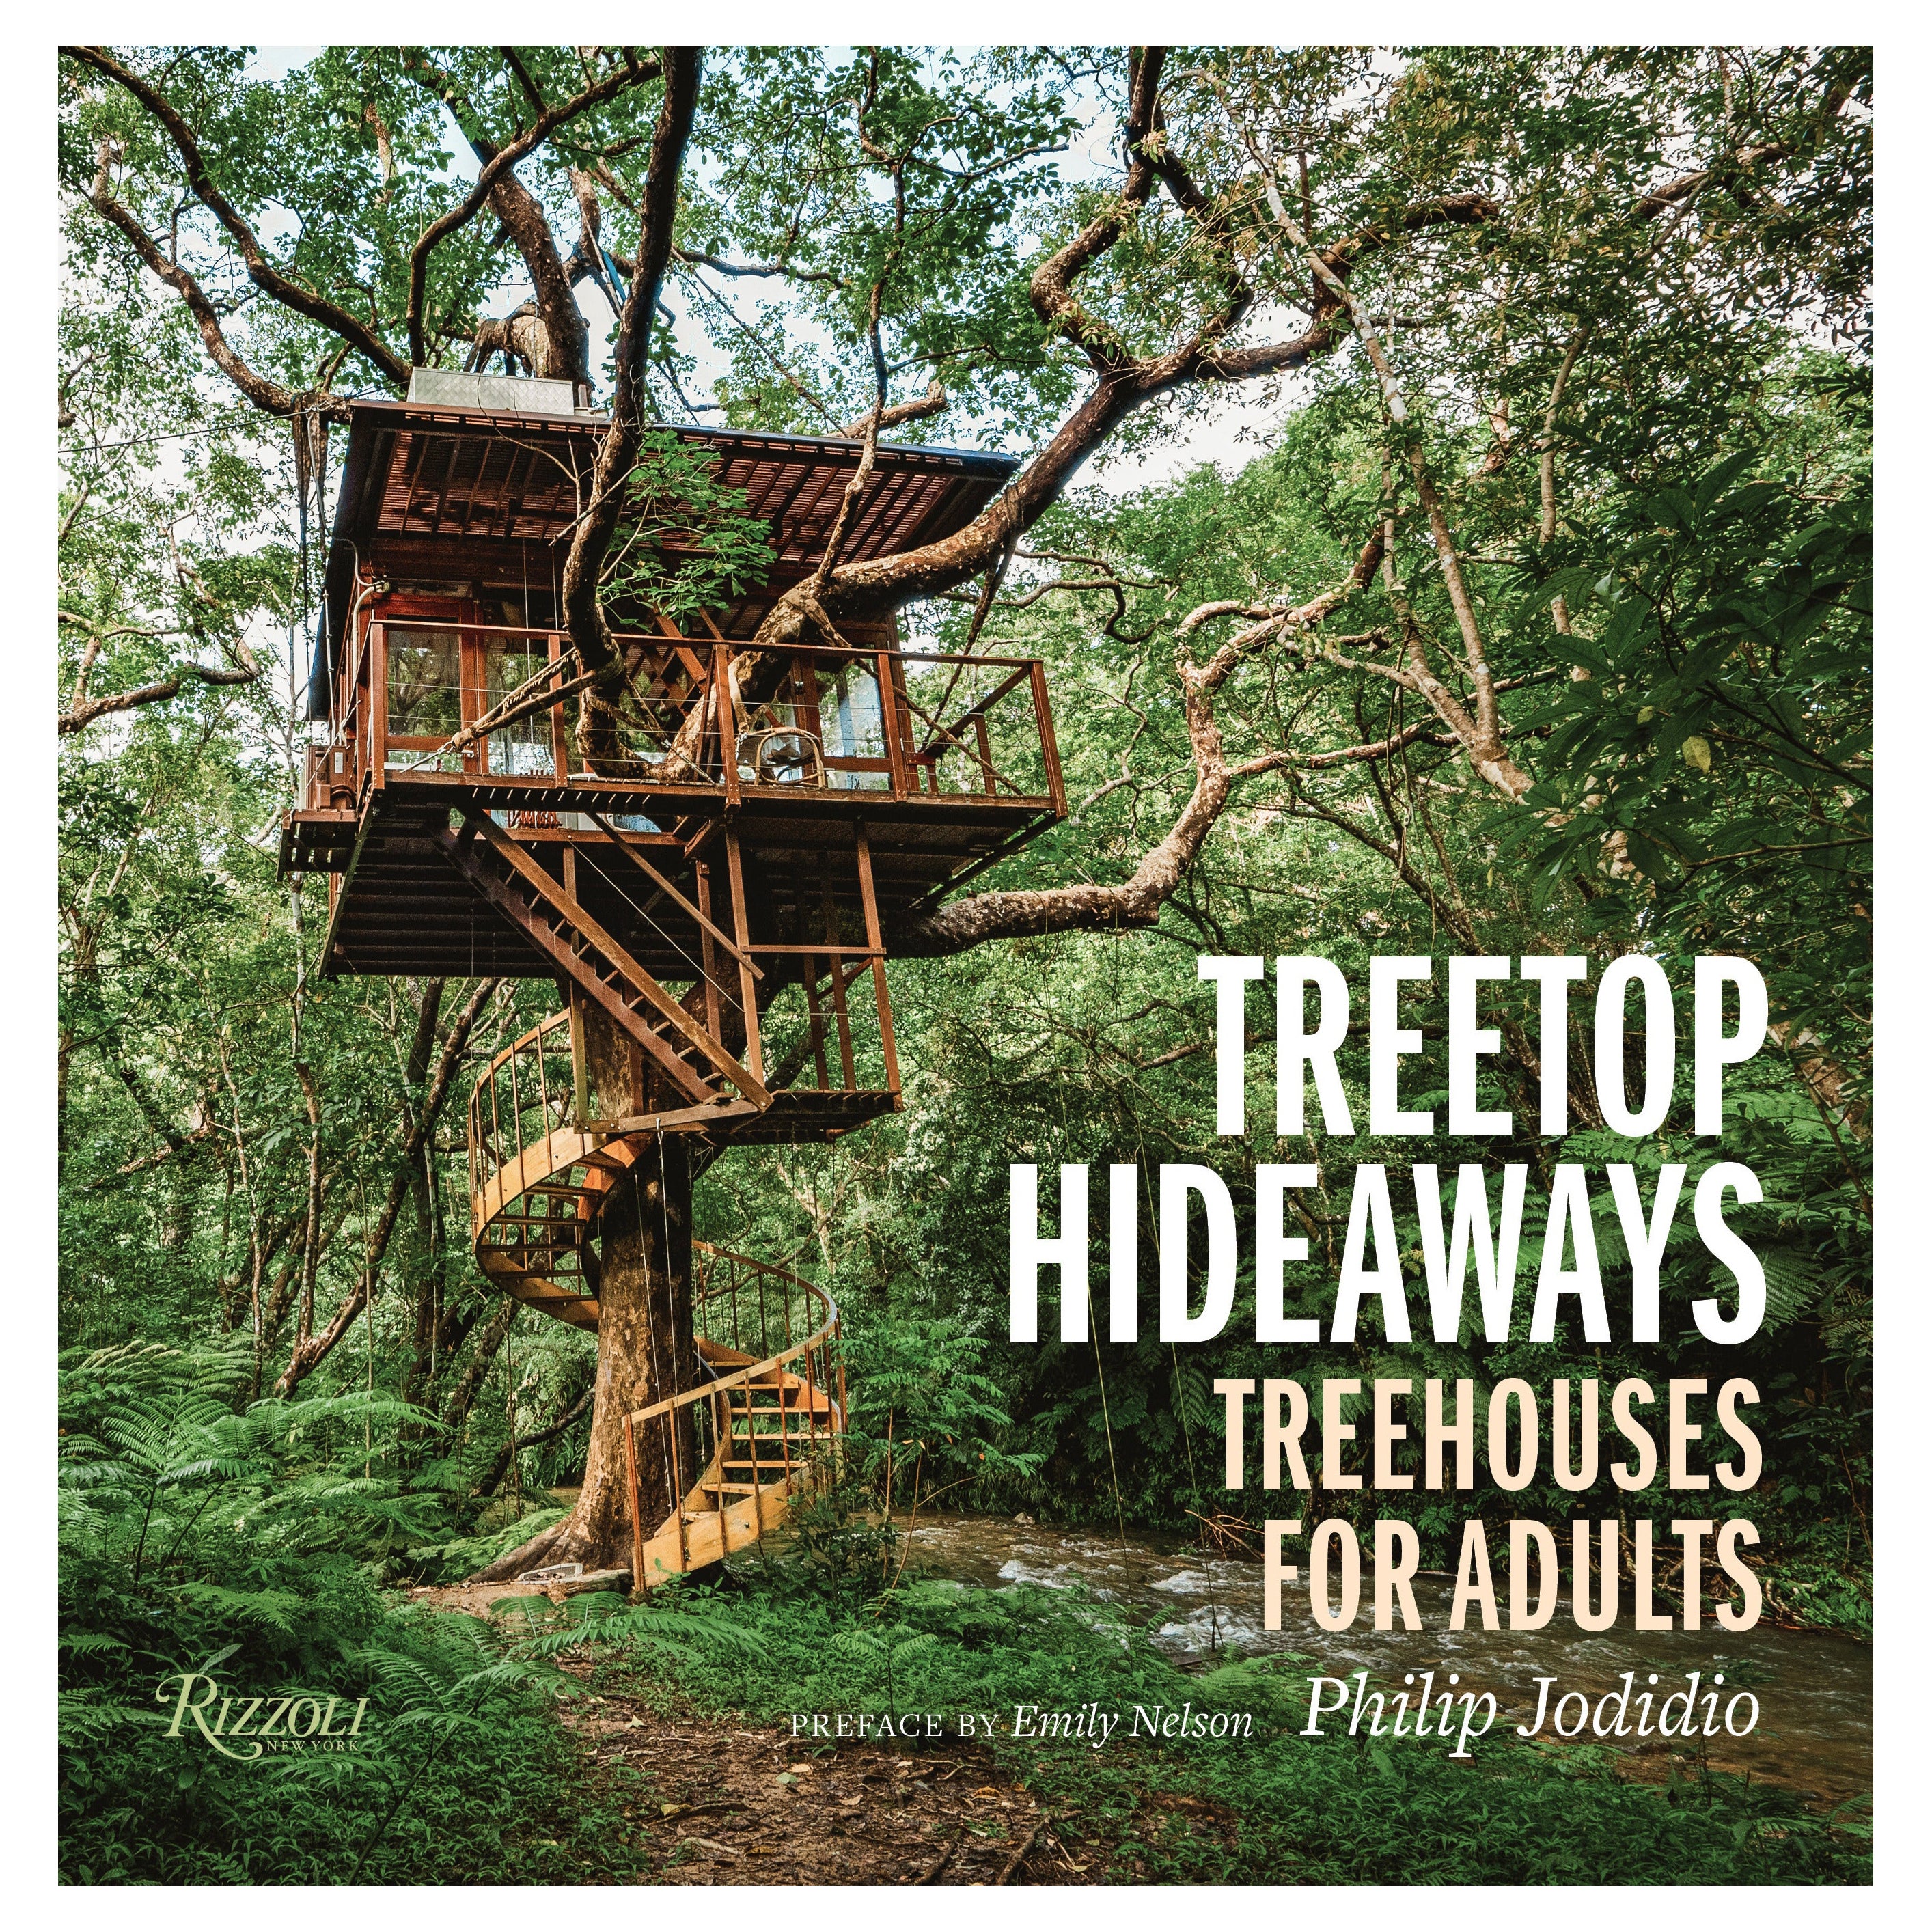 Treetop Hideaways Treehouses for Adults